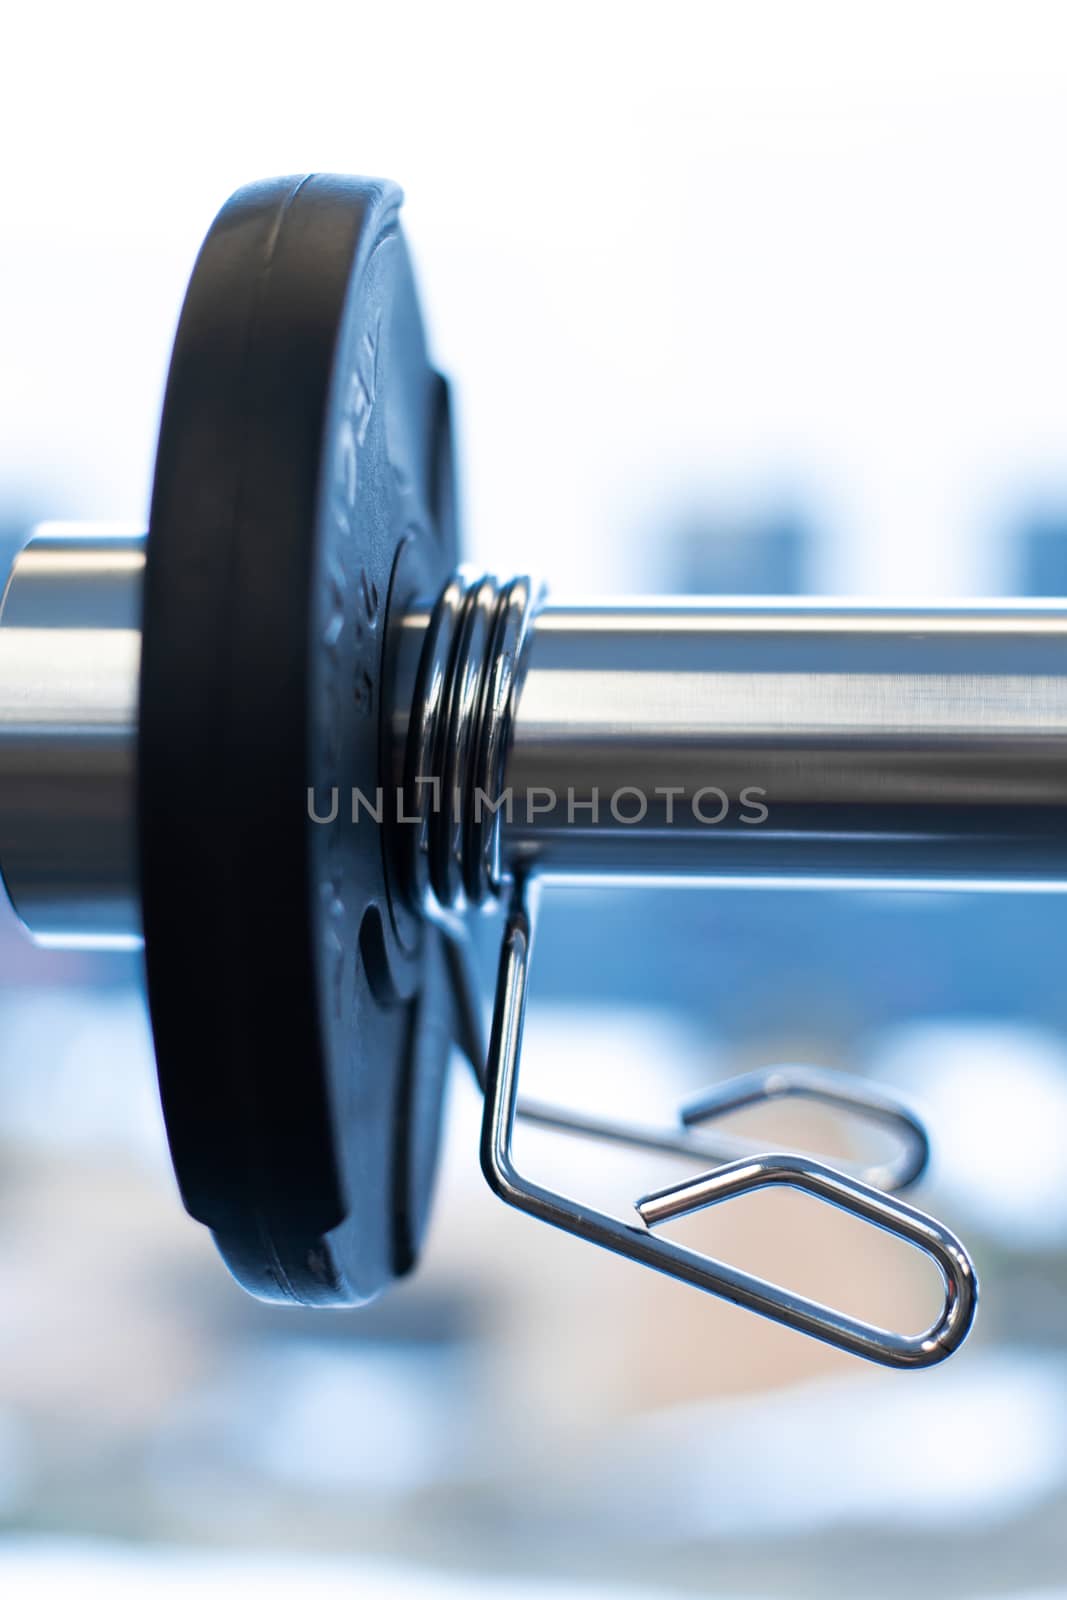 Closeup weight plate fixed on barbell in gym.